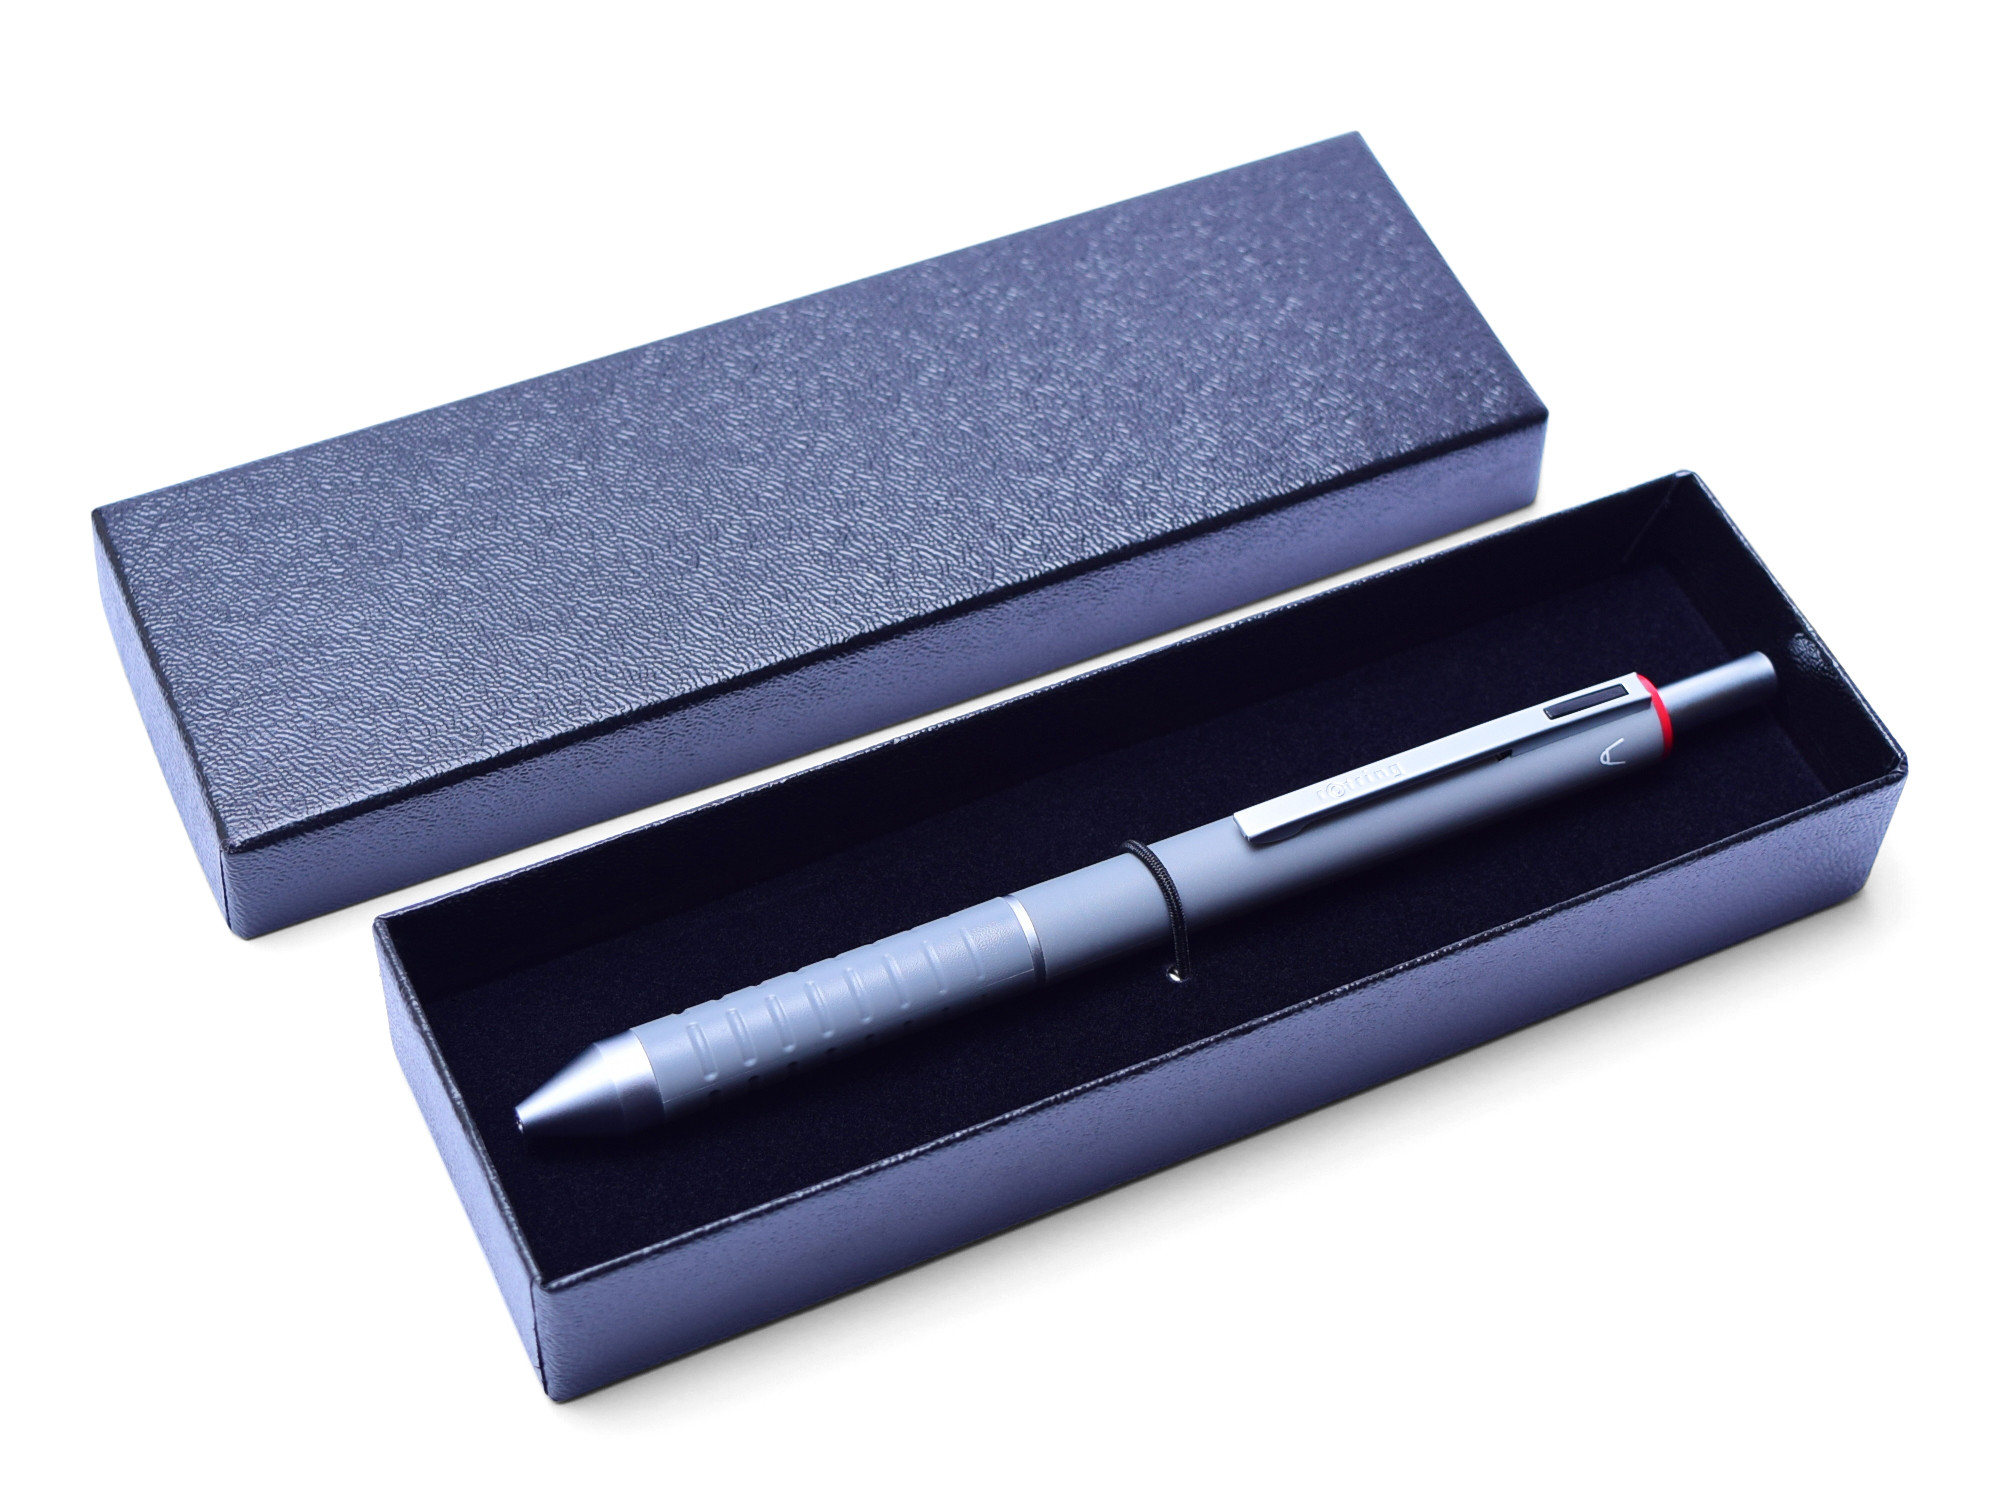 Rotring Tikky 3 in 1 Multi Pen Blue and Red ink and 0.7mm Mechanical P